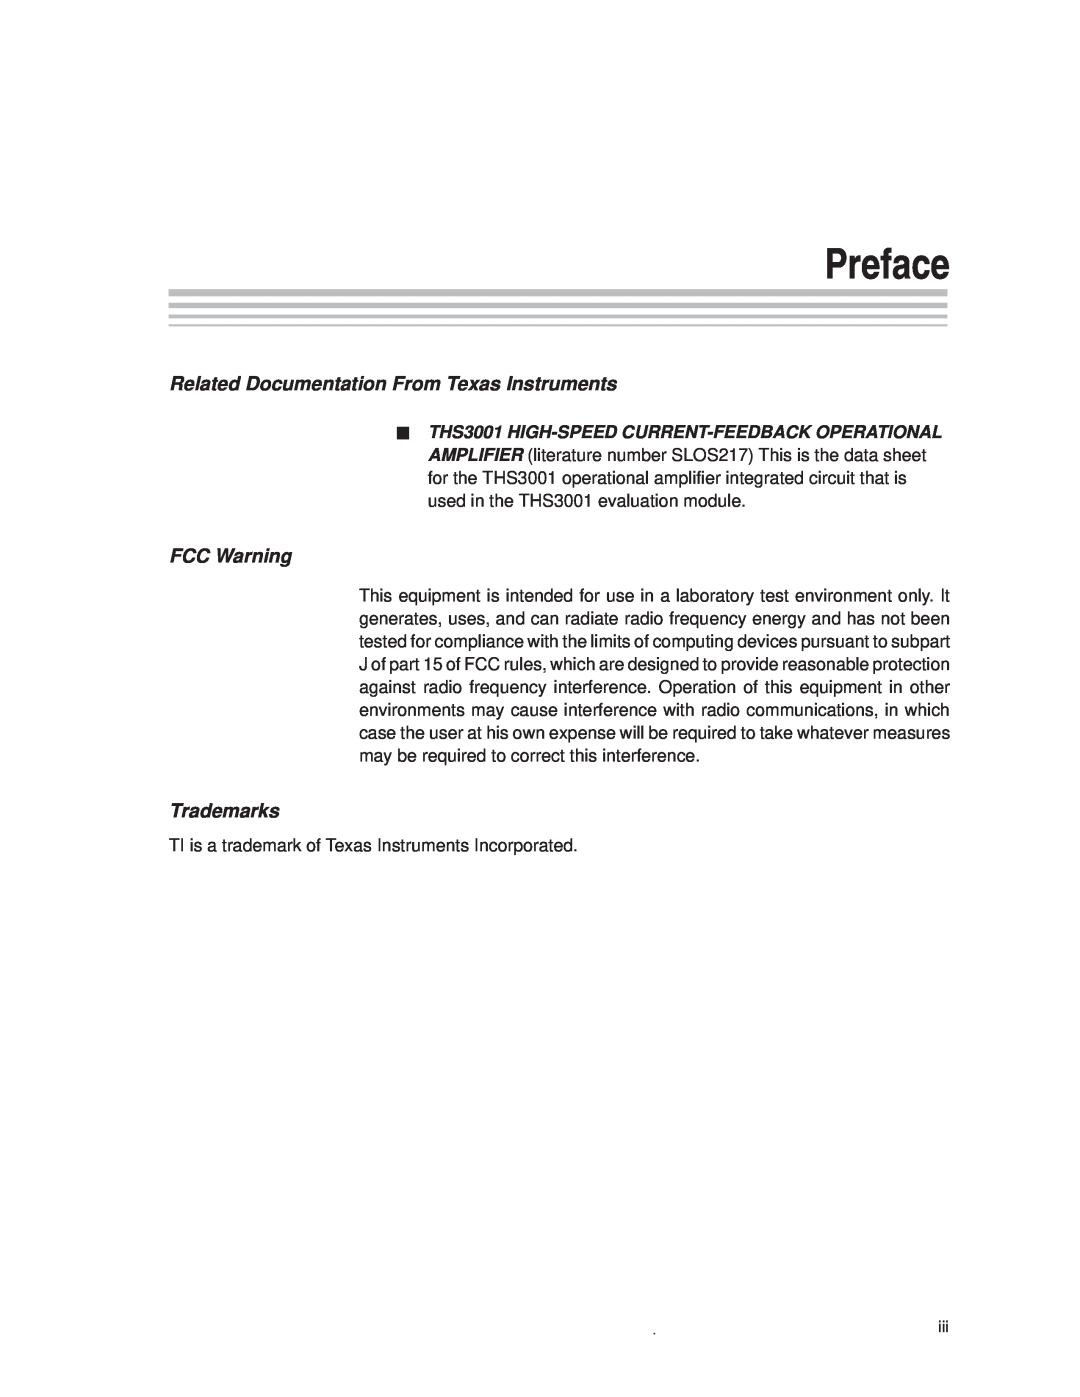 Texas Instruments THS3001 manual Preface, Related Documentation From Texas Instruments, FCC Warning, Trademarks 